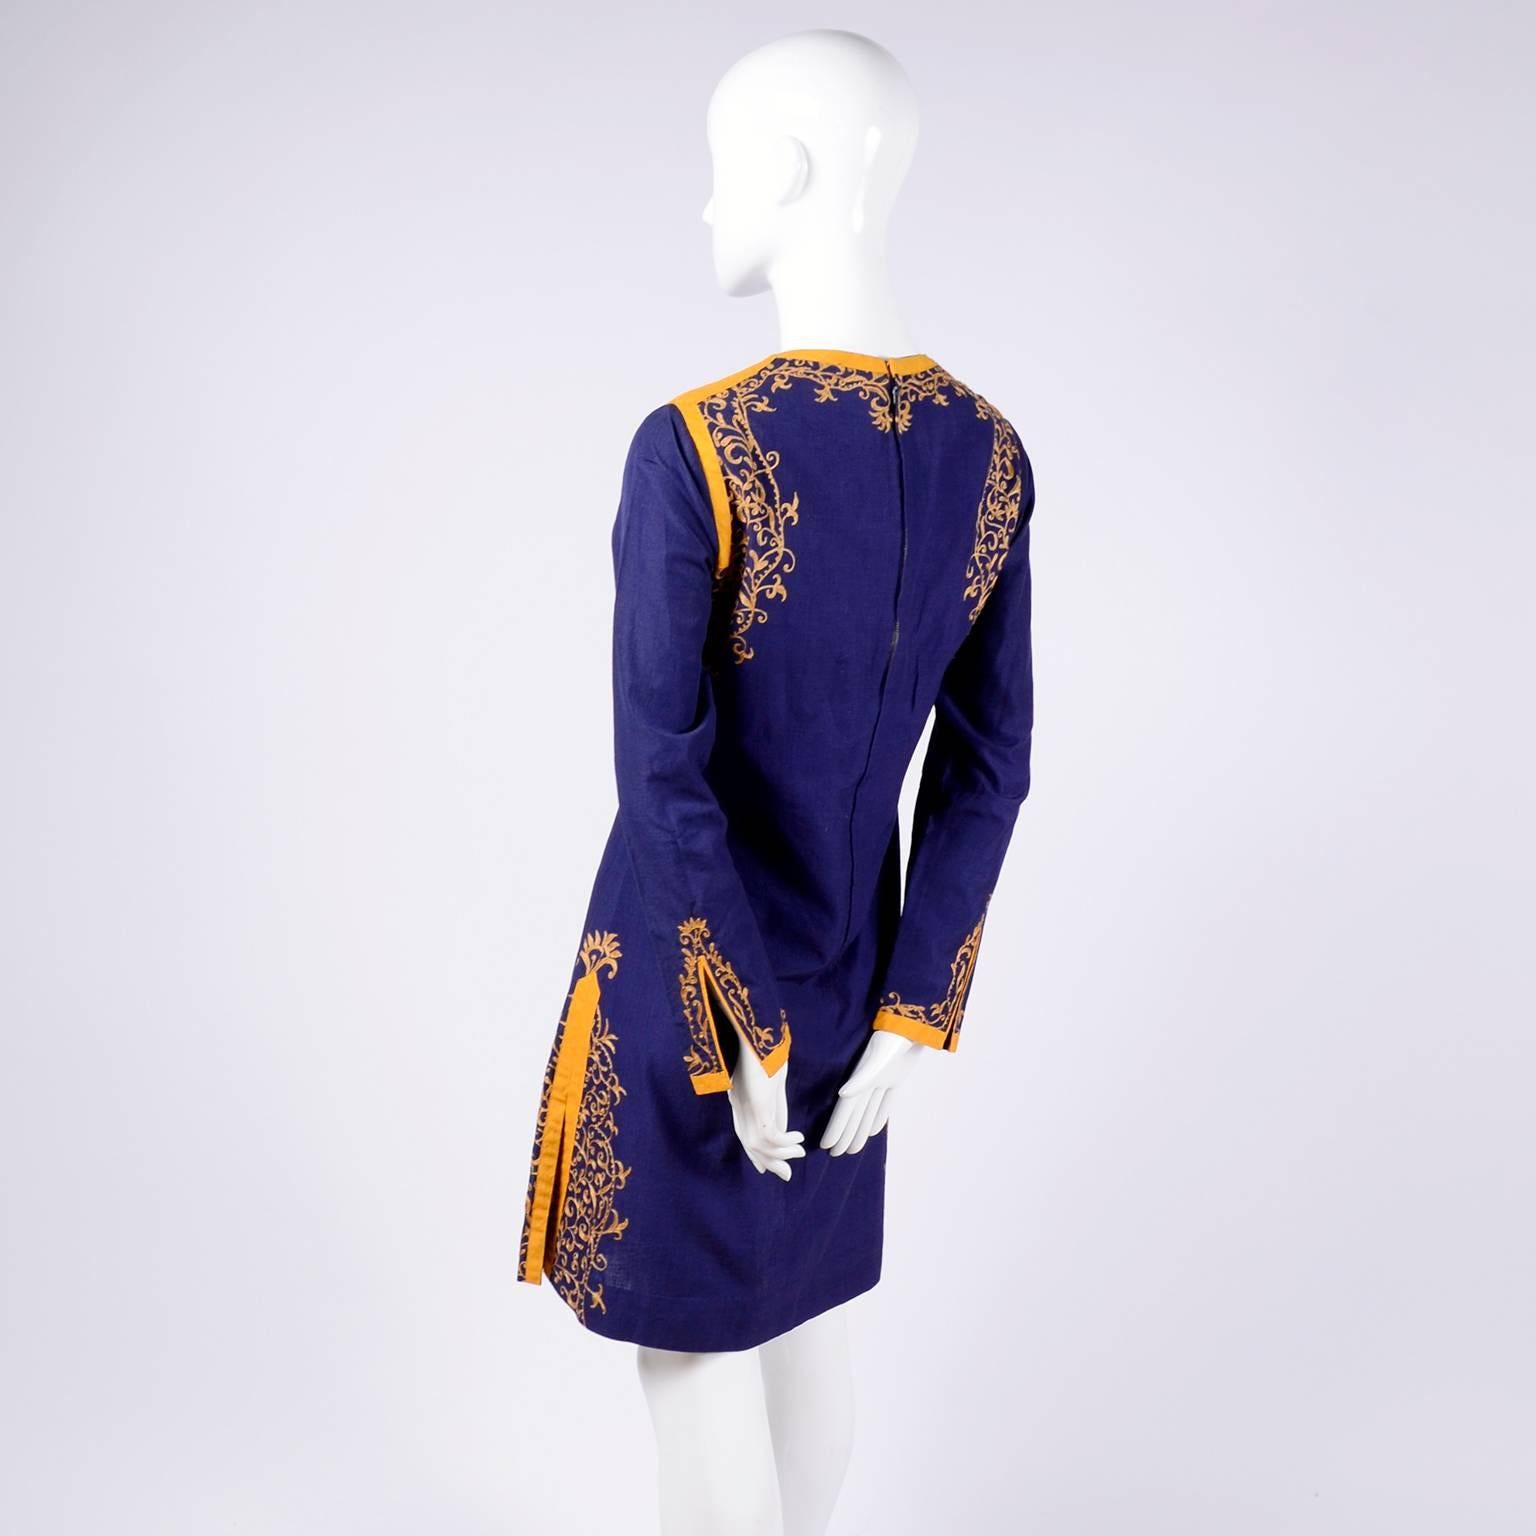 Aananda Vintage Navy Blue Cotton Dress Tunic with Marigold Embroidery, 1960s  4